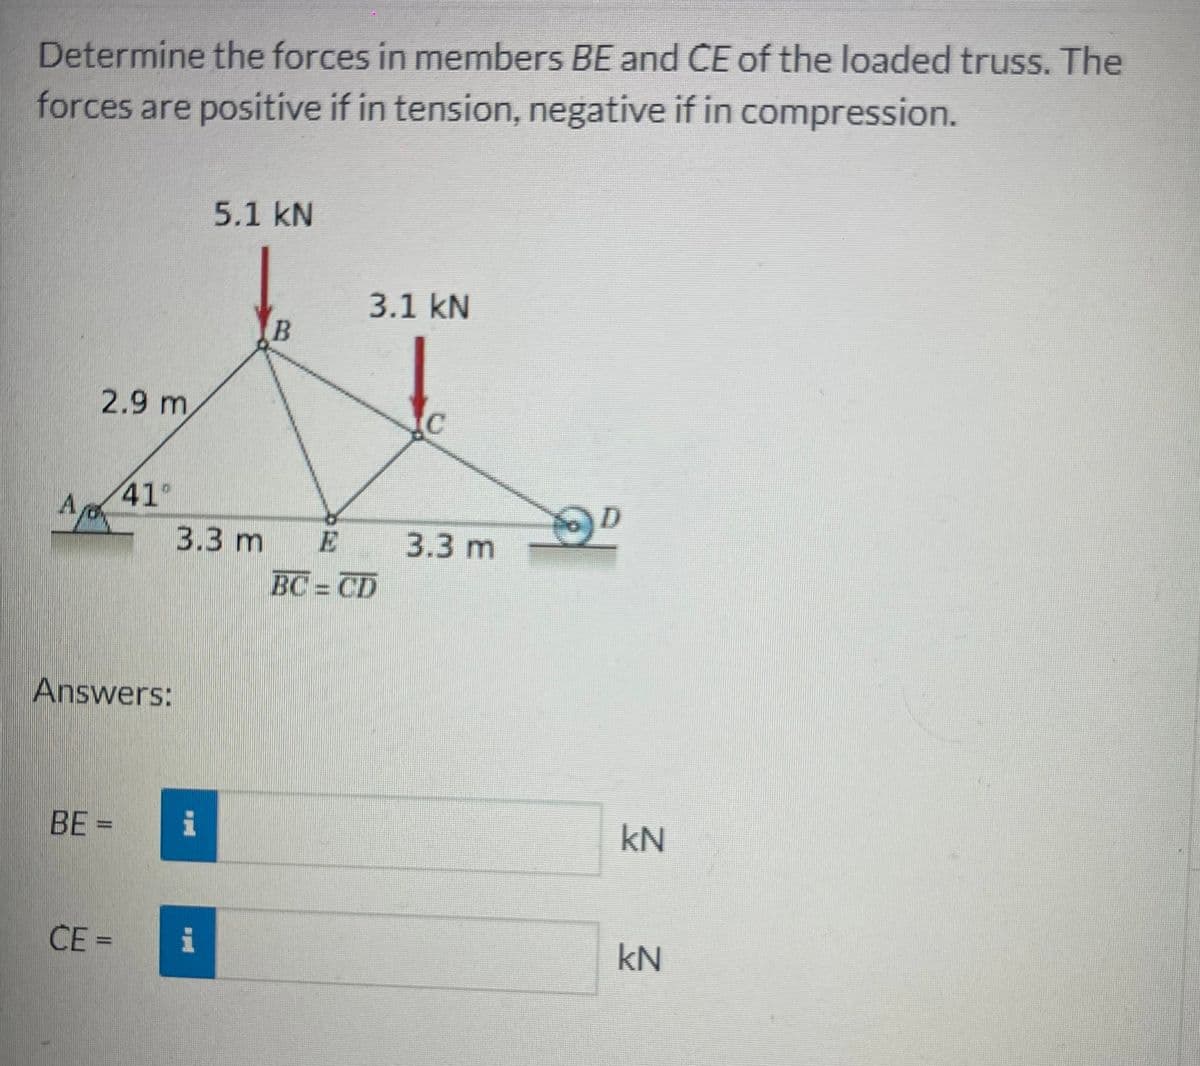 Determine the forces in members BE and CE of the loaded truss. The
forces are positive if in tension, negative if in compression.
Ap
2.9 m
Answers:
BE =
41°
CE=
5.1 kN
#H
B
3.3 m E
3.1 kN
BC=CD
C
3.3 m
kN
kN